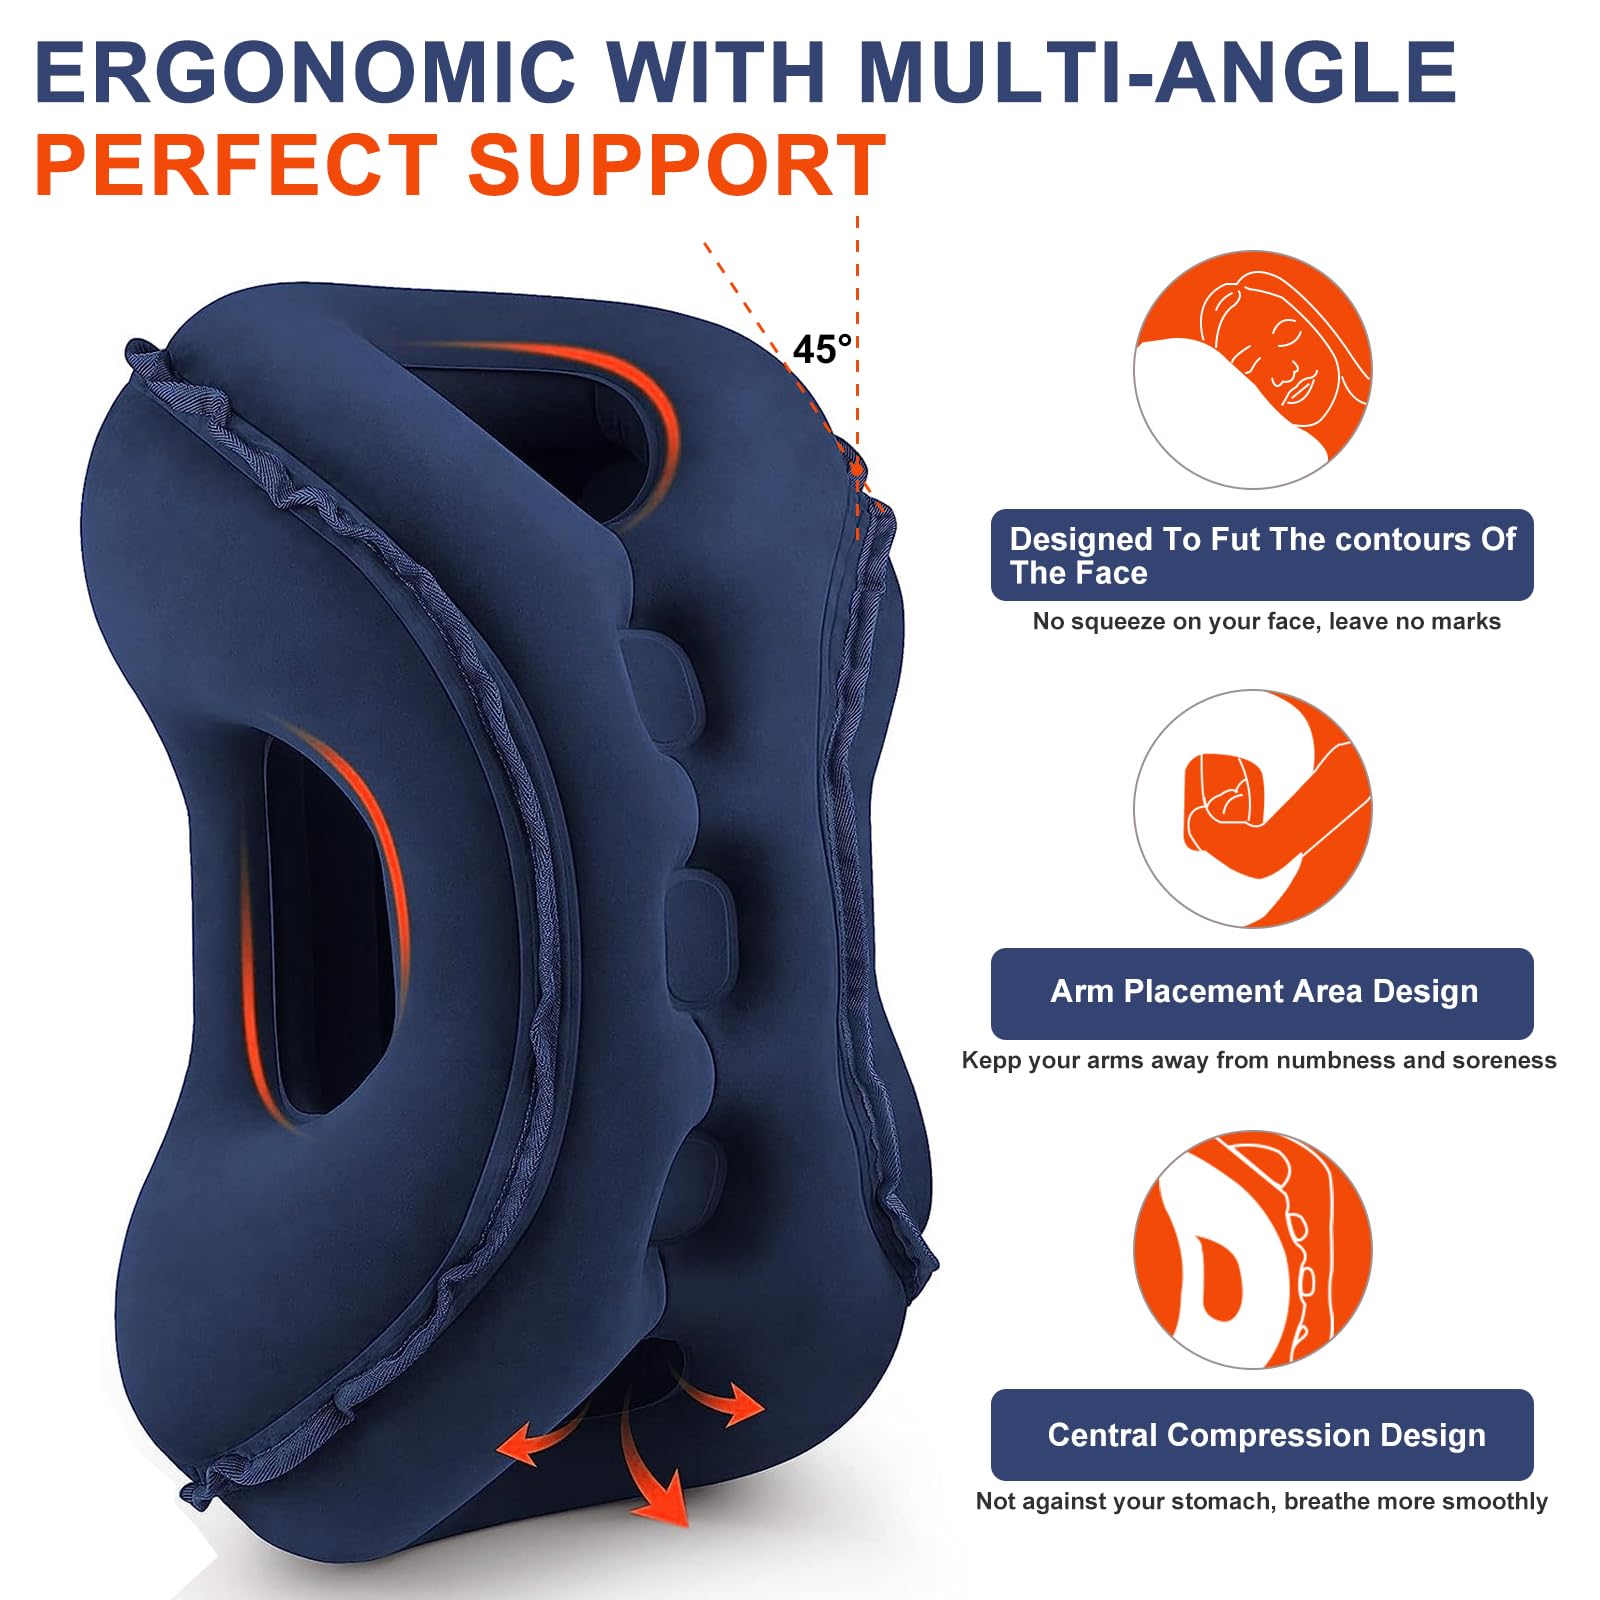 Inflatable Travel Pillow, Airplane Neck Pillow Comfortably Supports Head and Chin, Travel Pillow for Sleeping Airplane - Avoid Neck & Shoulder Pain, Used for Airplanes/Cars/Buses/Trains/Office Napping